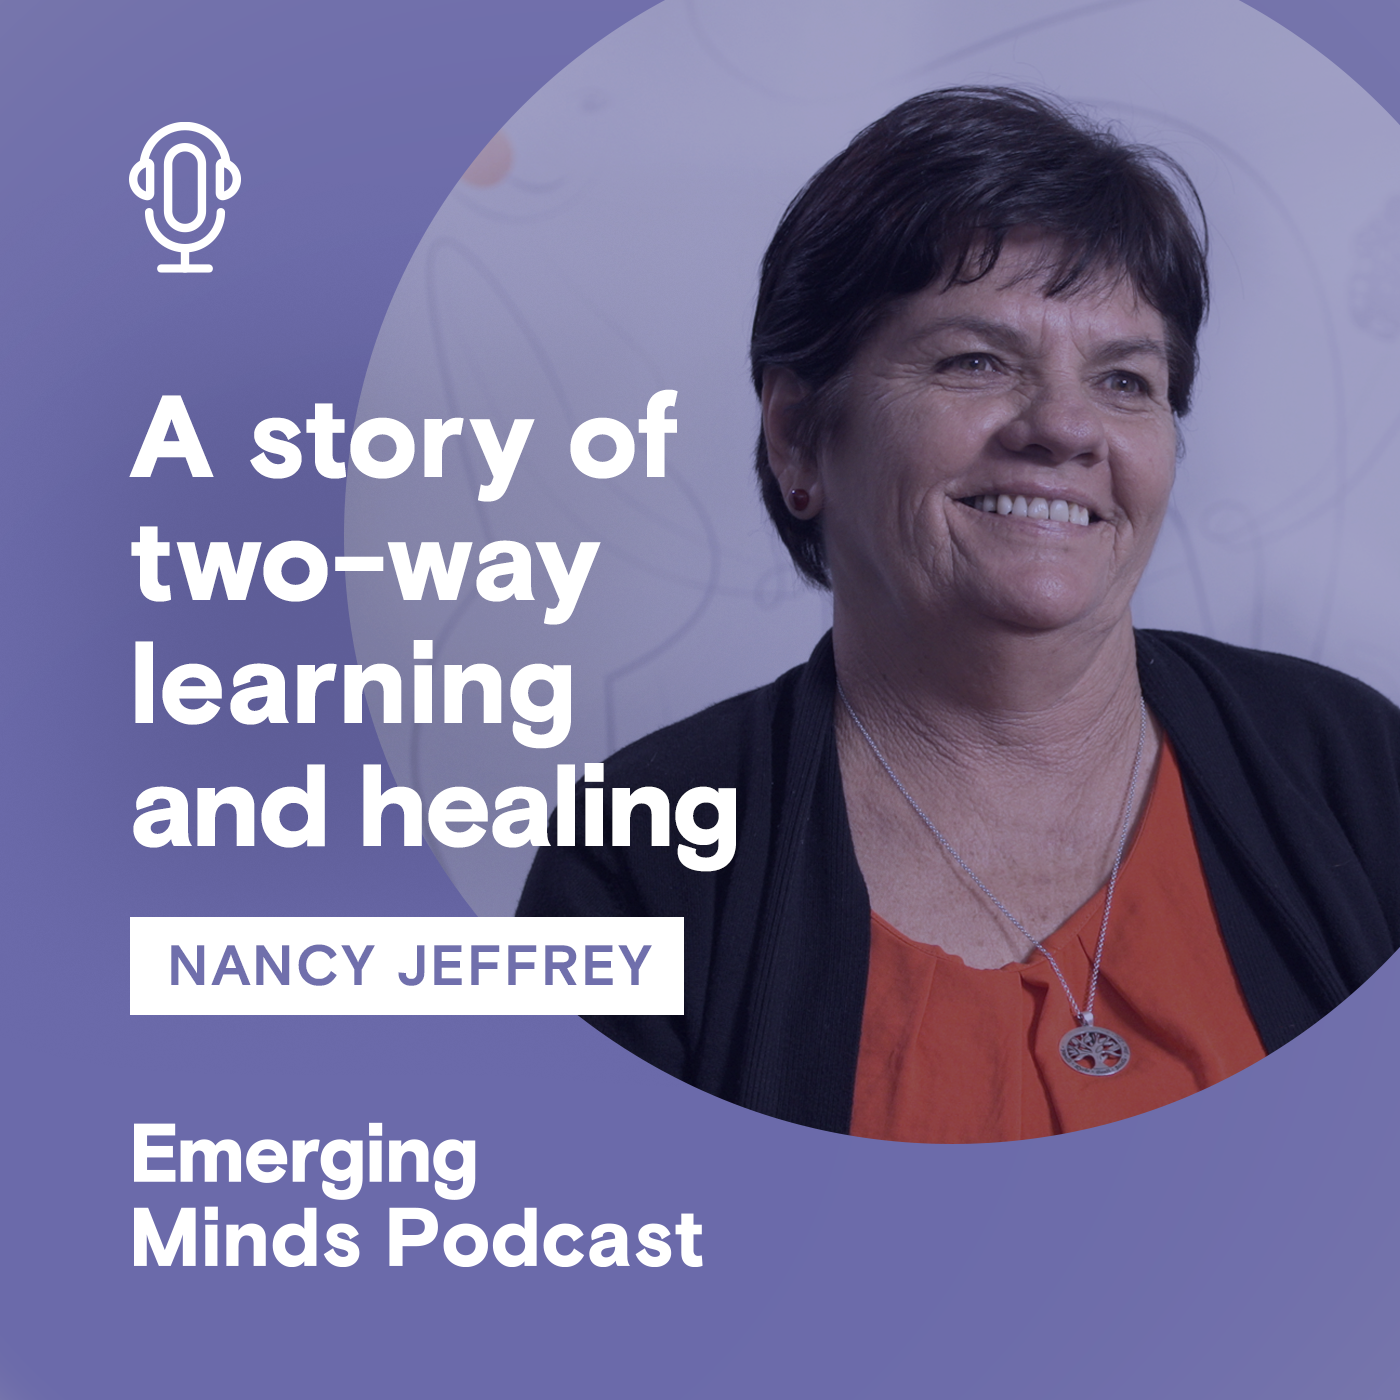 A story of two-way learning and healing